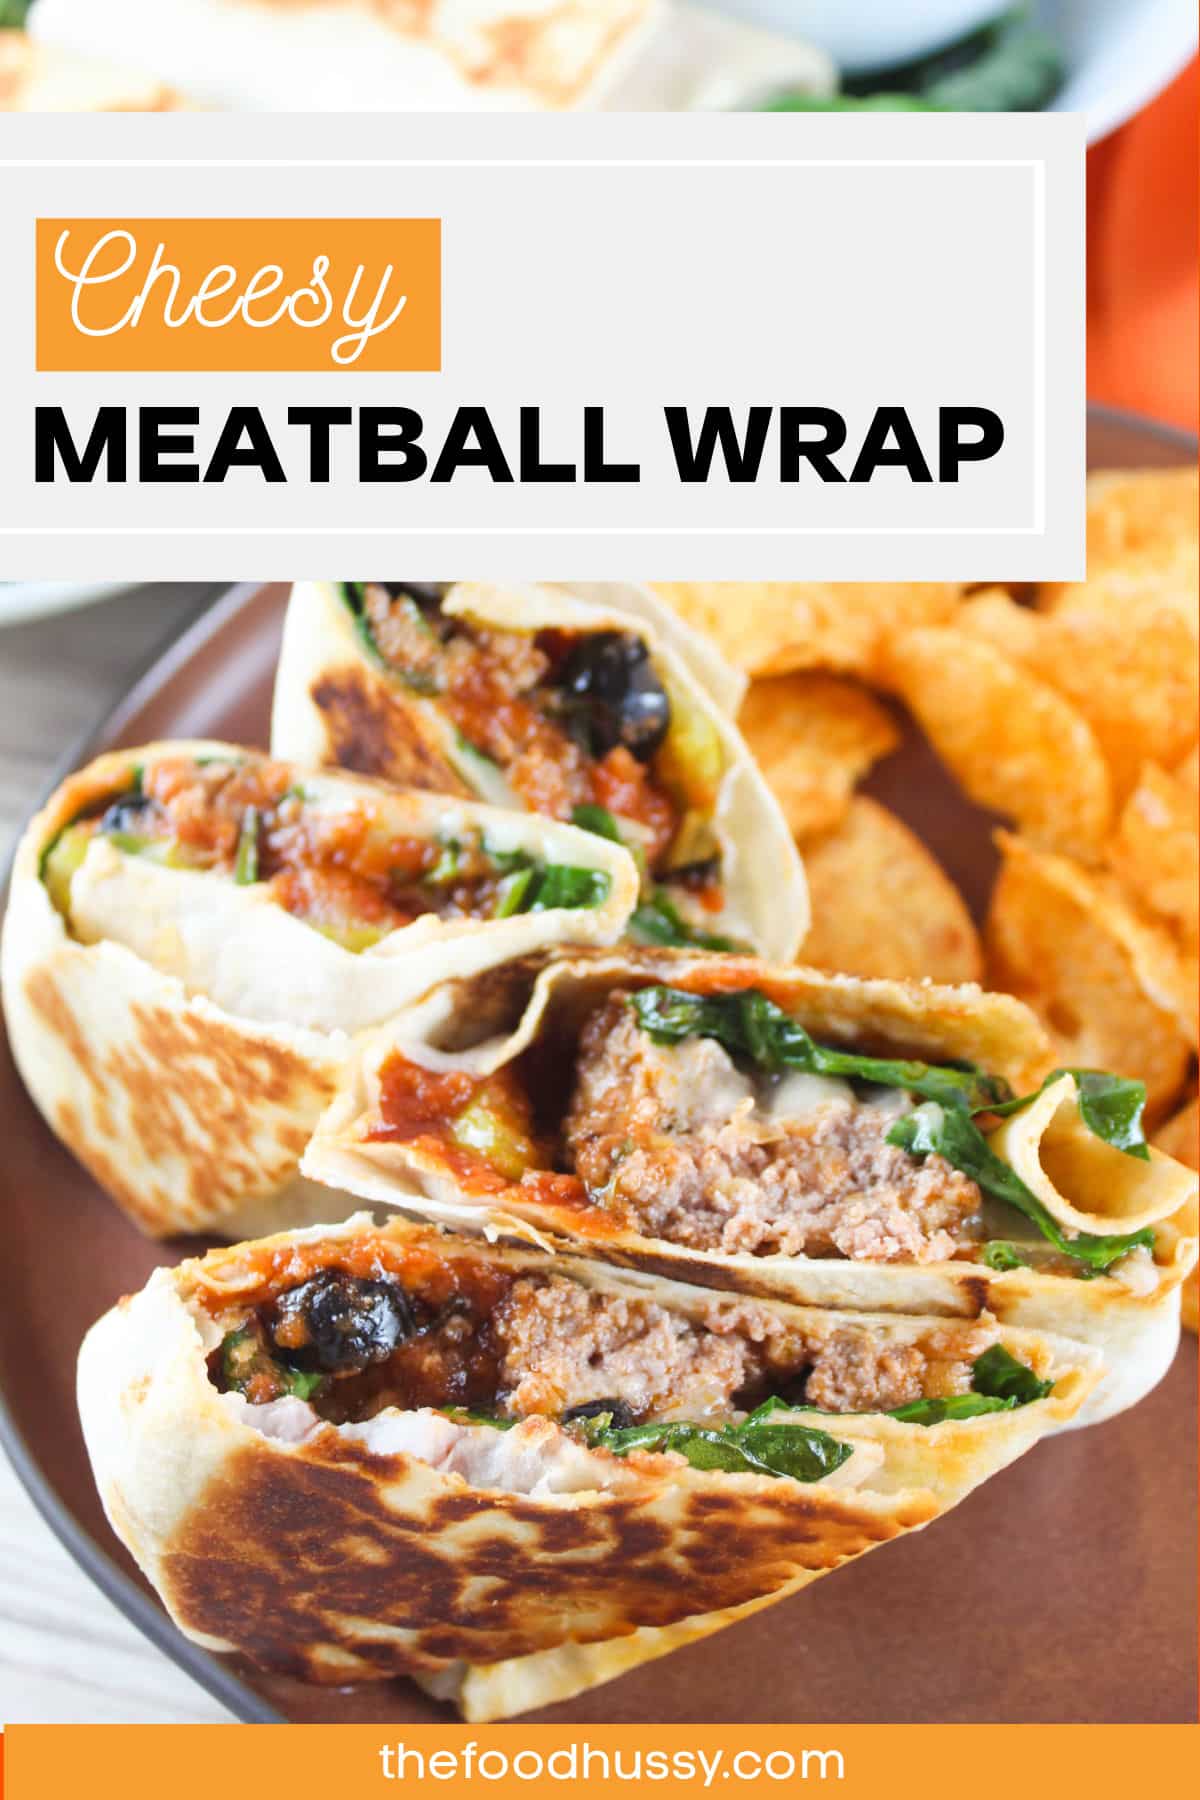 Yesterdays homemade meatballs are this todays Easy Italian Meatball Wrap! This wrap adds spinach, black olives, banana peppers and cheeeeeeese to make a delicious lunch any day of the week. Leftovers reimagined!  via @foodhussy